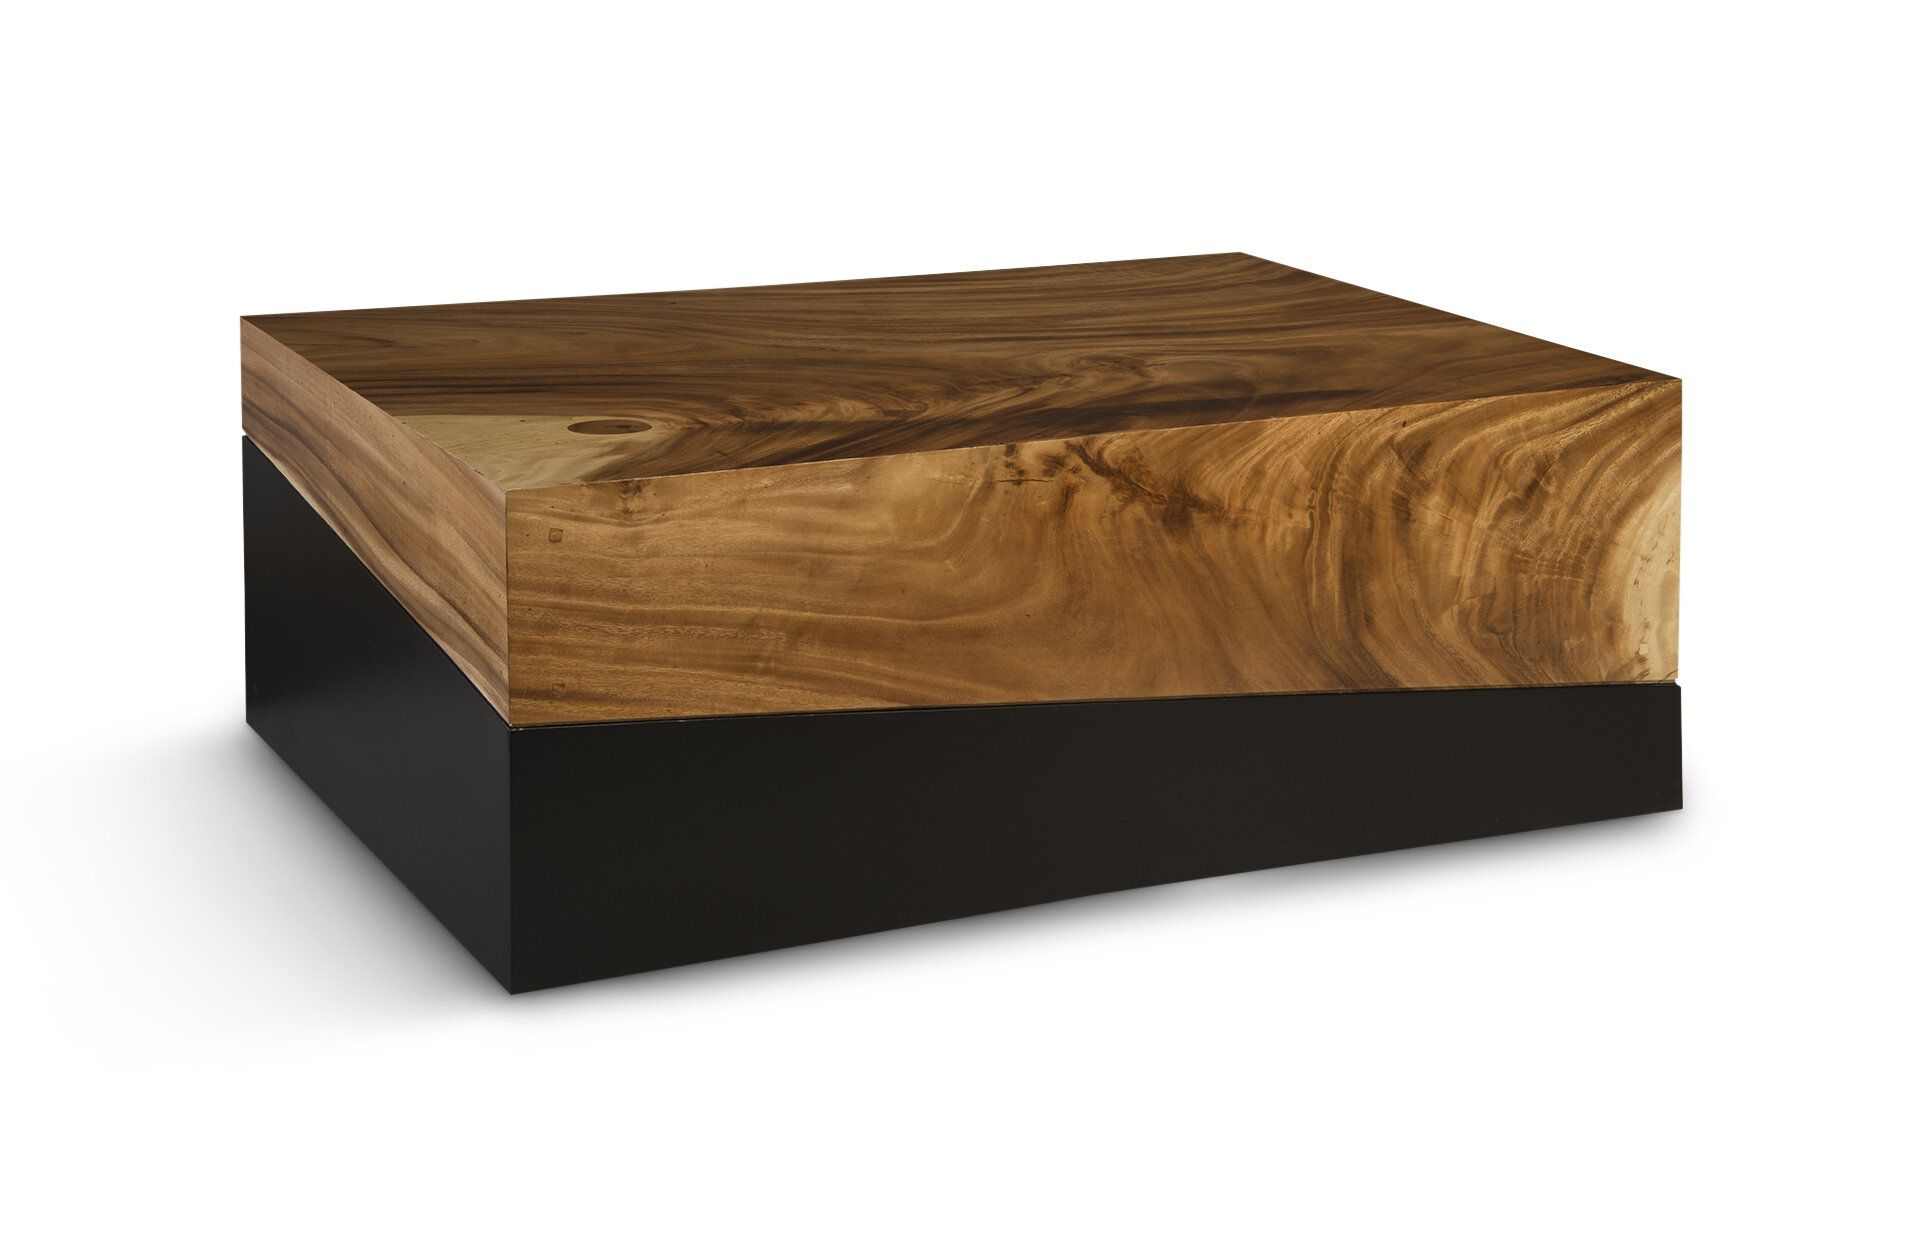 Phillips Collection Geometry Block Coffee Table | Wayfair Within Geometric Block Solid Coffee Tables (View 10 of 20)